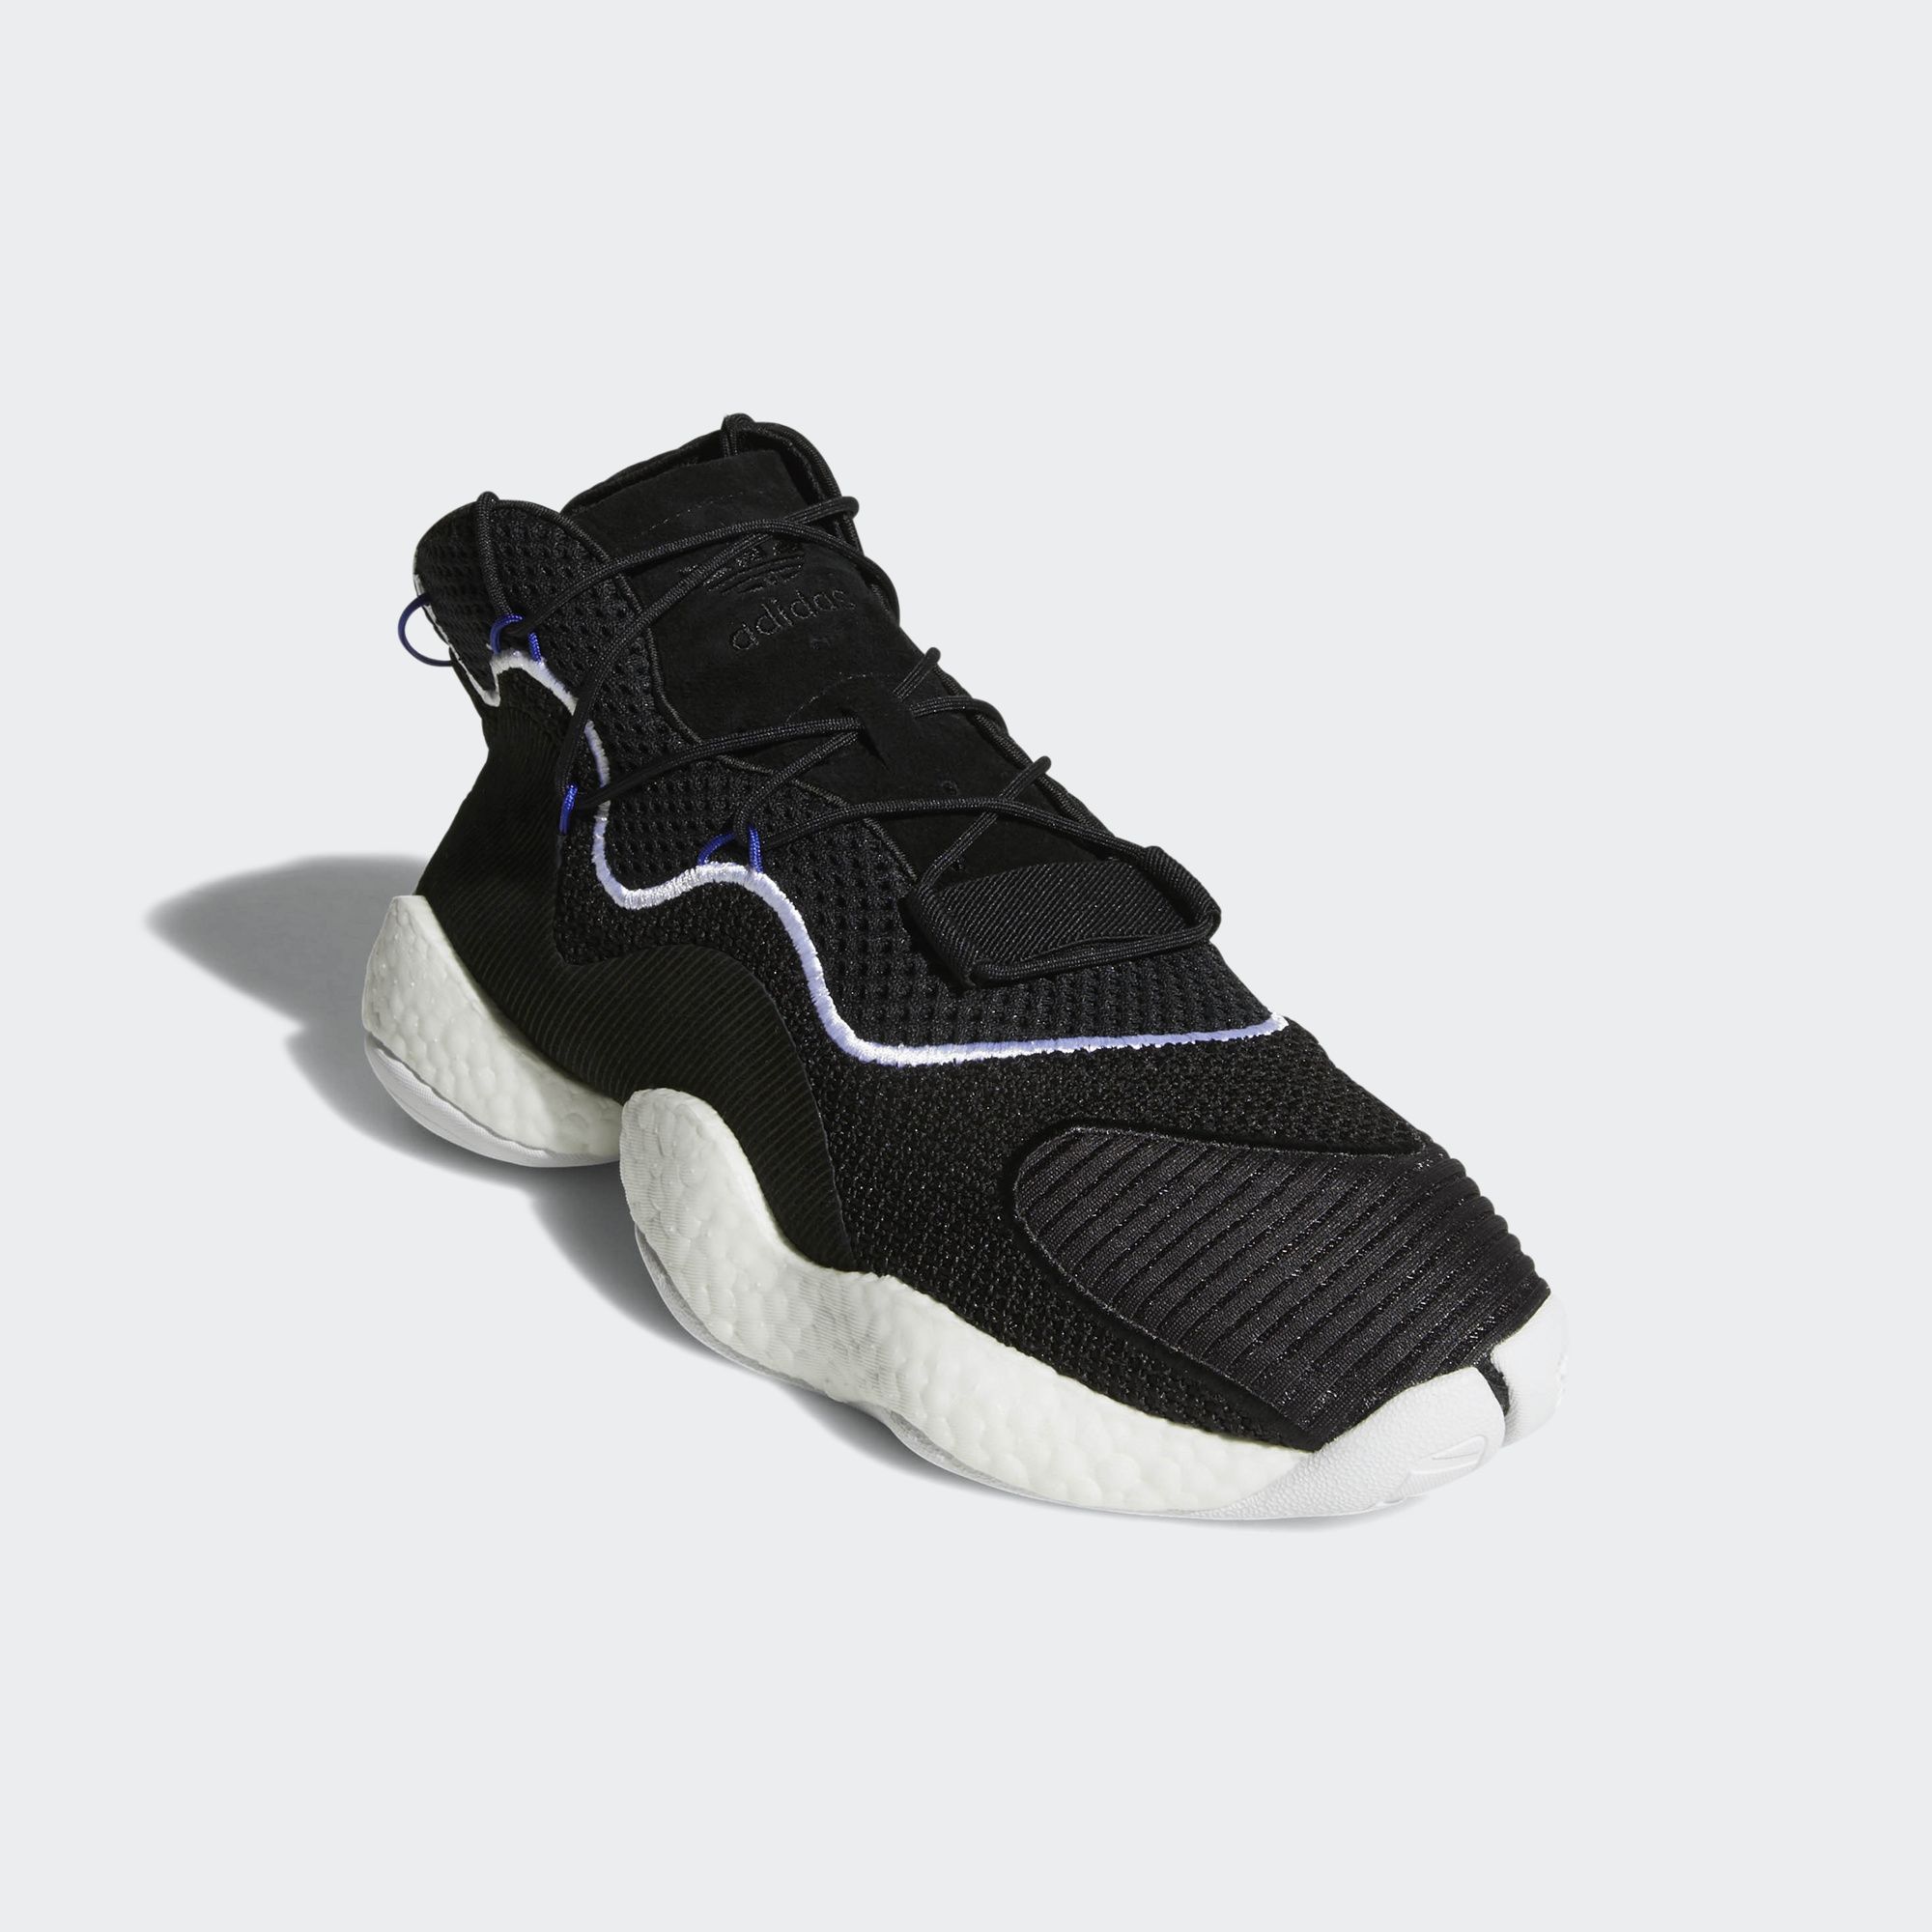 An Official Look at the adidas Crazy BYW LVL I for Off-Court Use ...